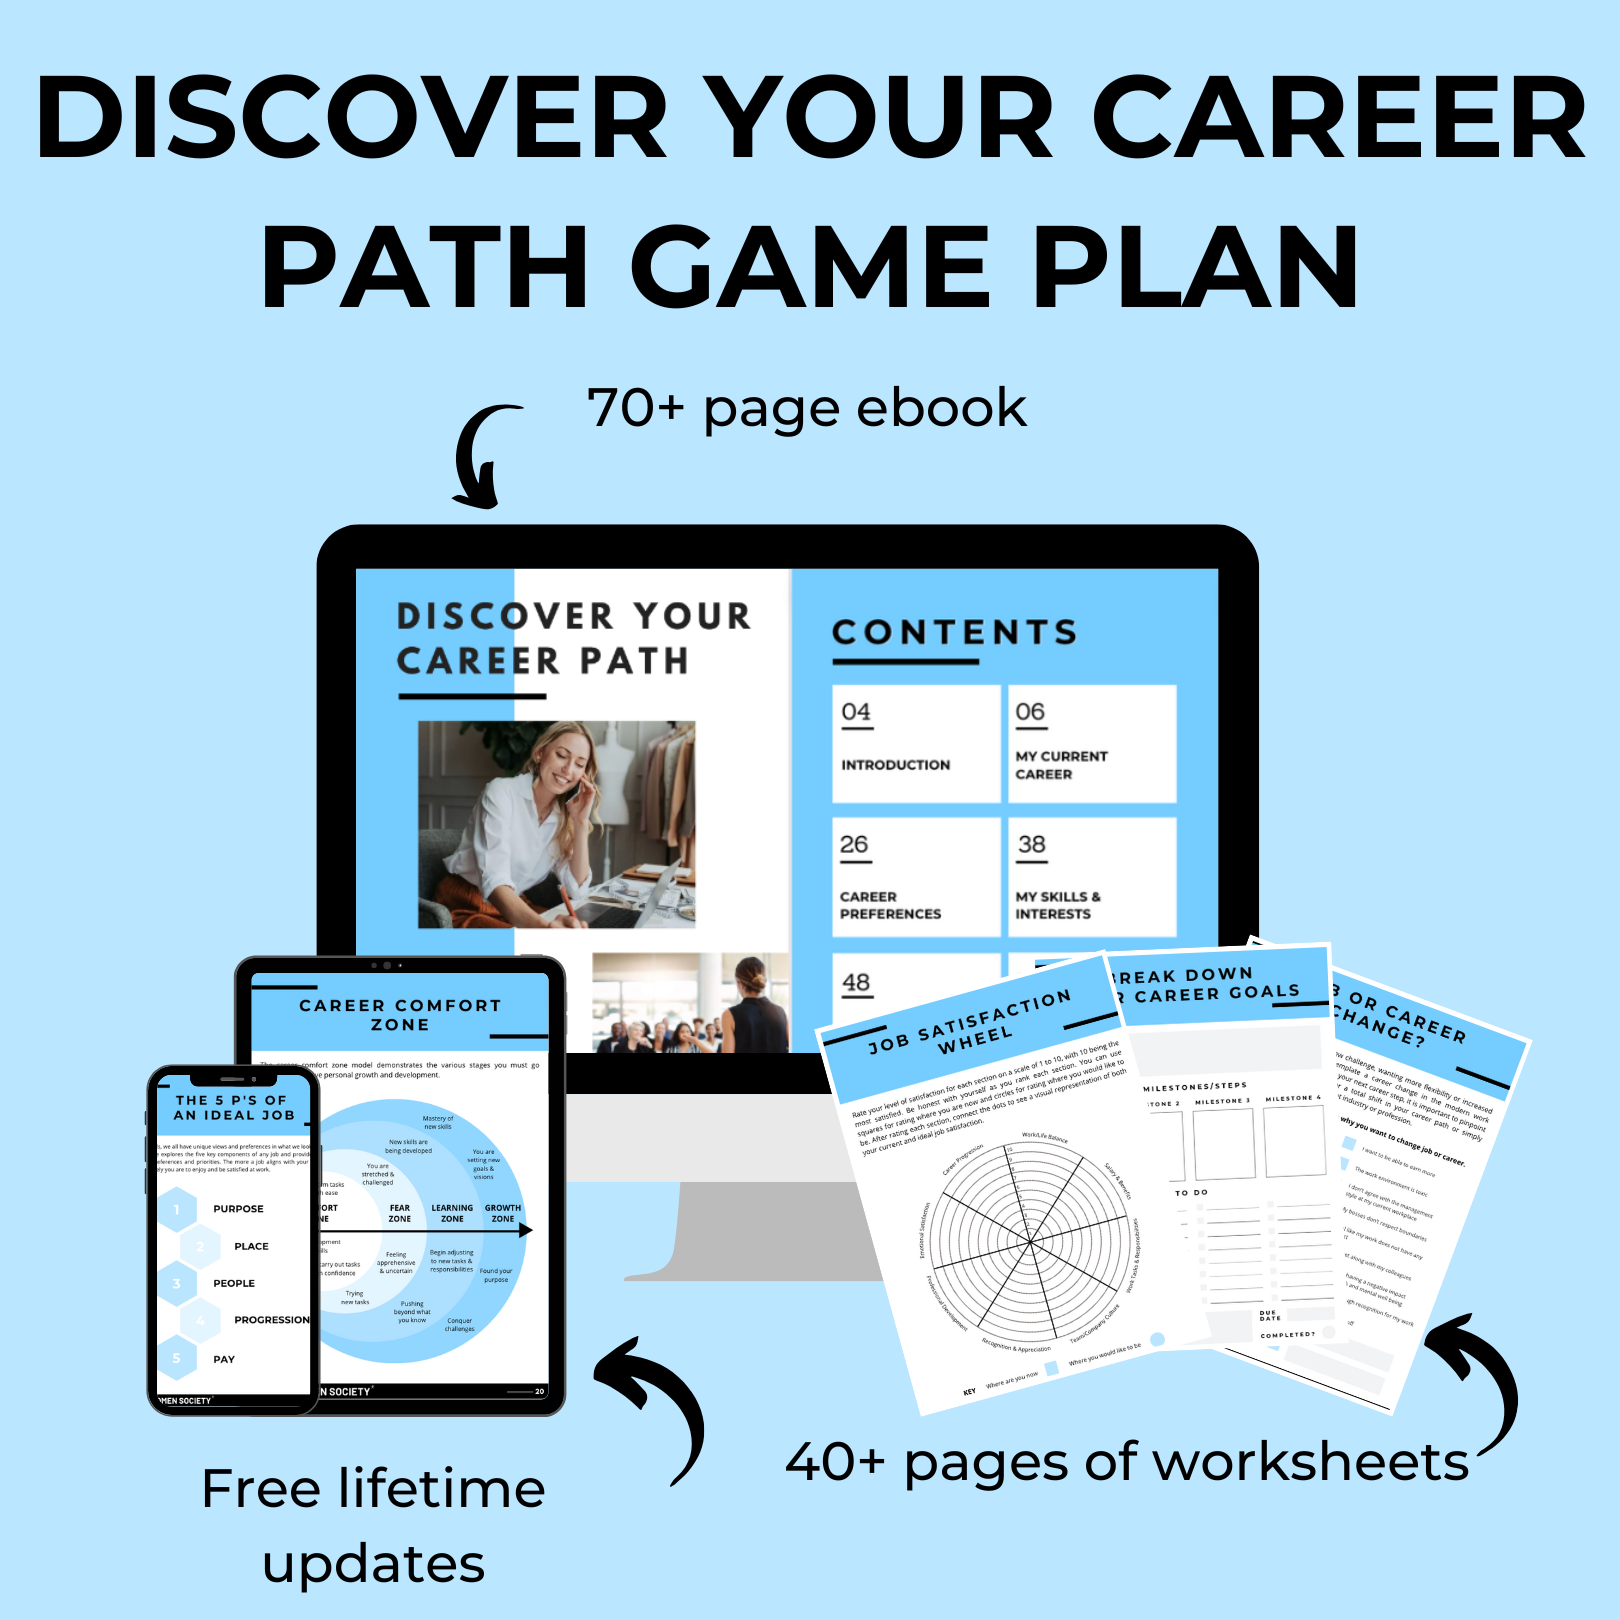 LEVEL UP YOUR CAREER COMBO